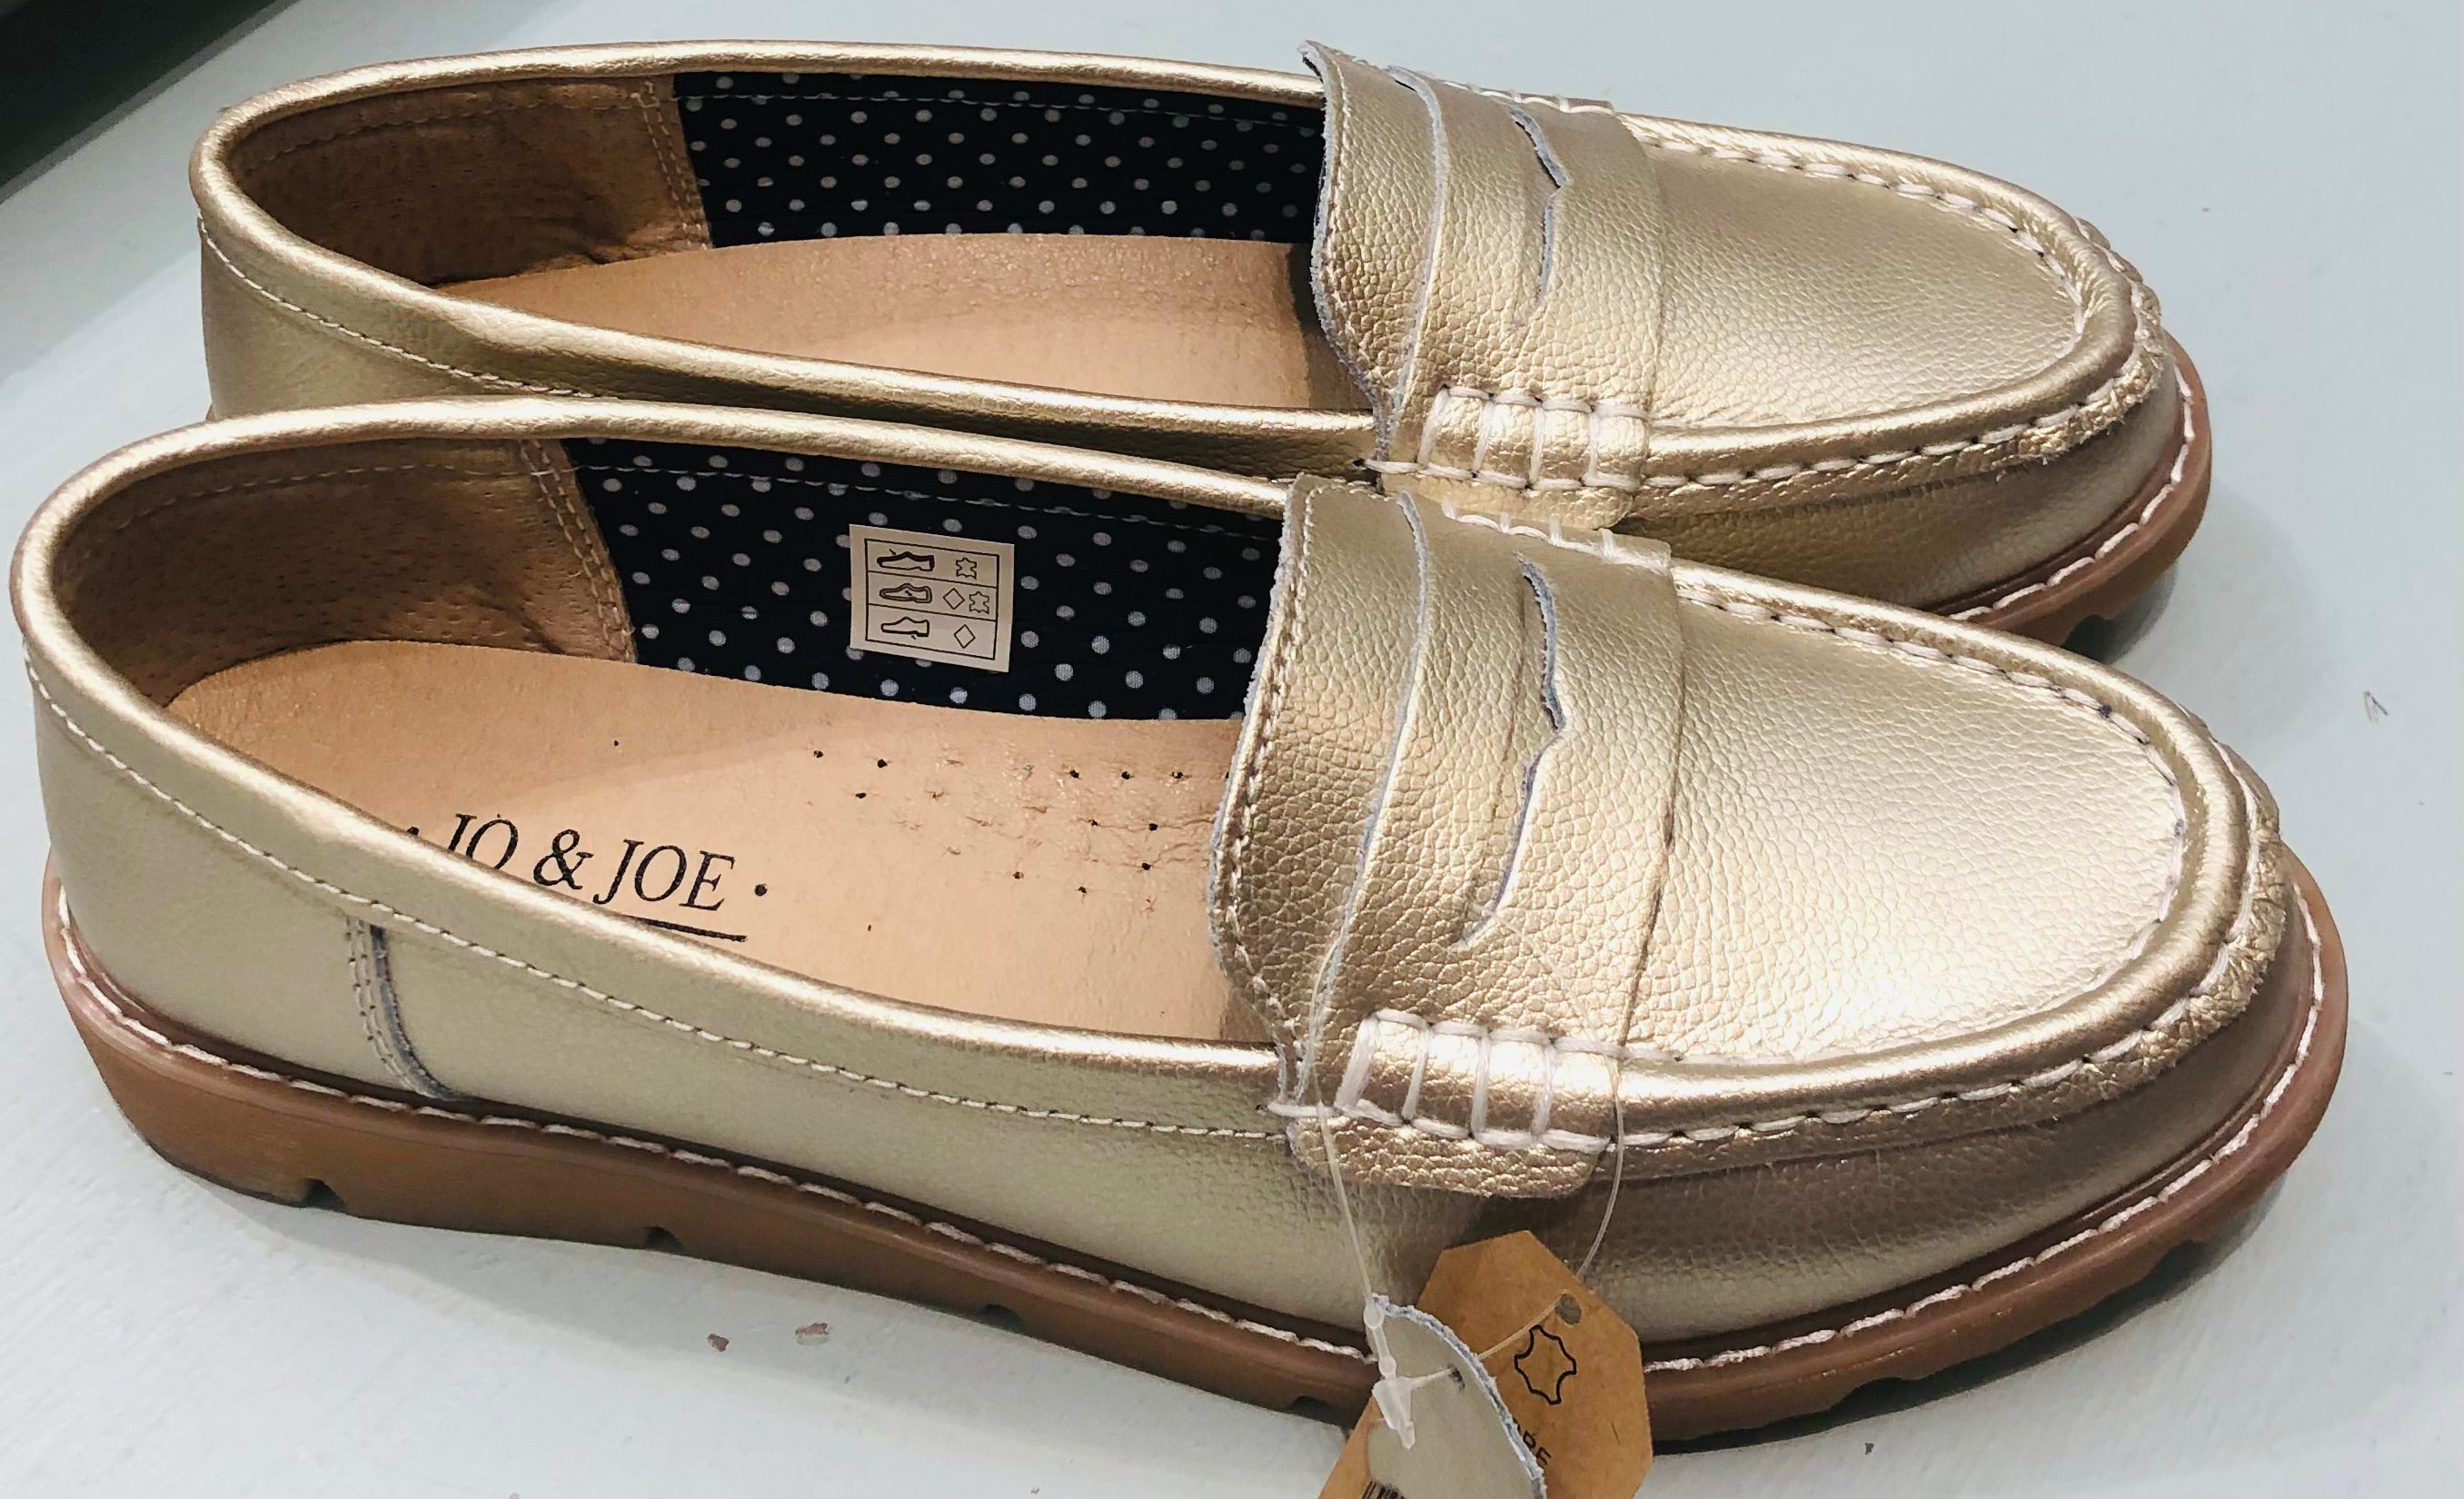 Shore Loafer available in 2 colours